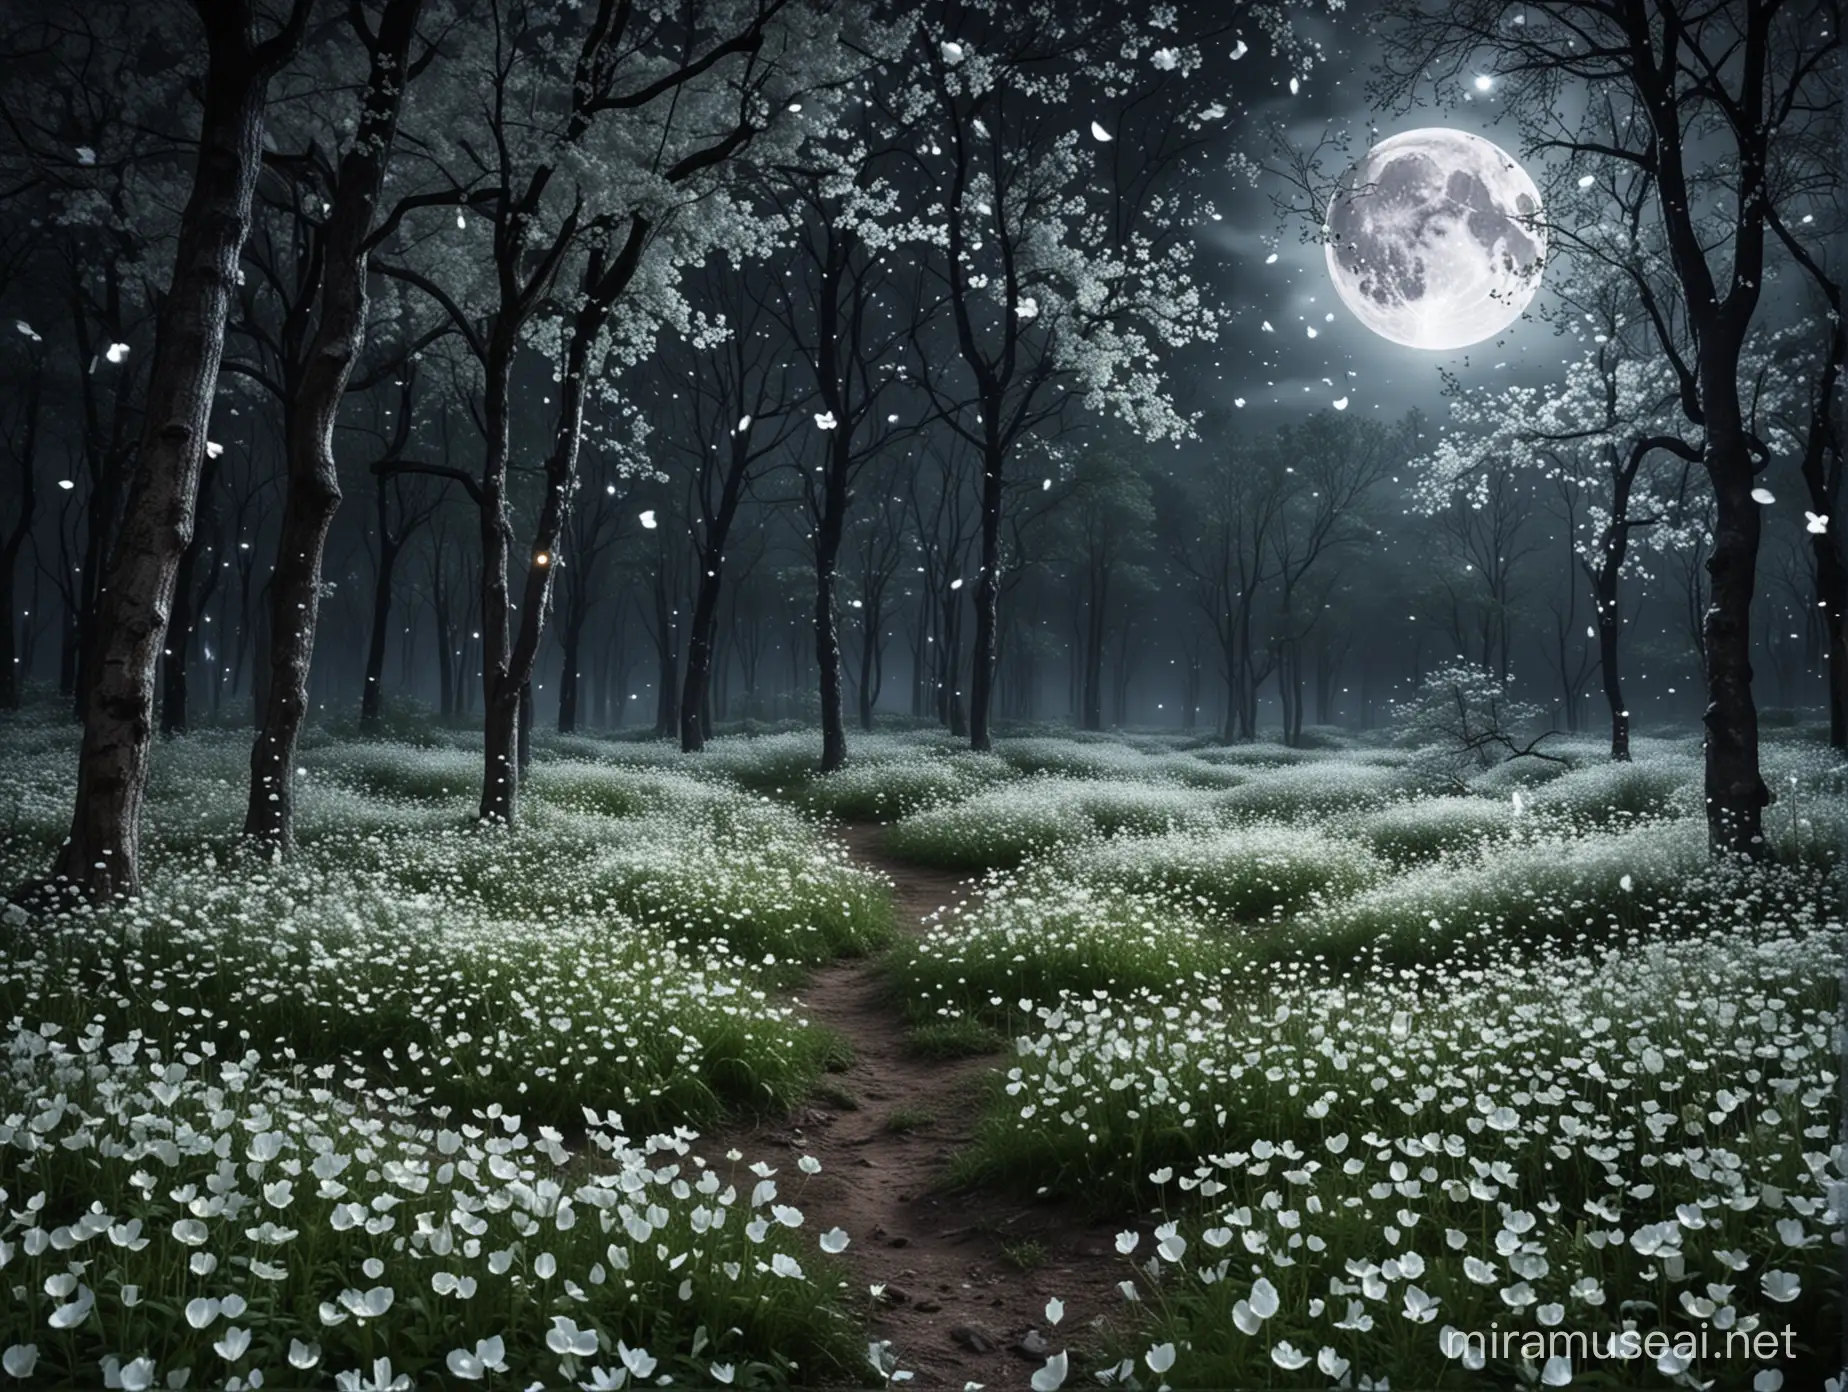 Enchanted Forest Moonlit Night of Falling Petals